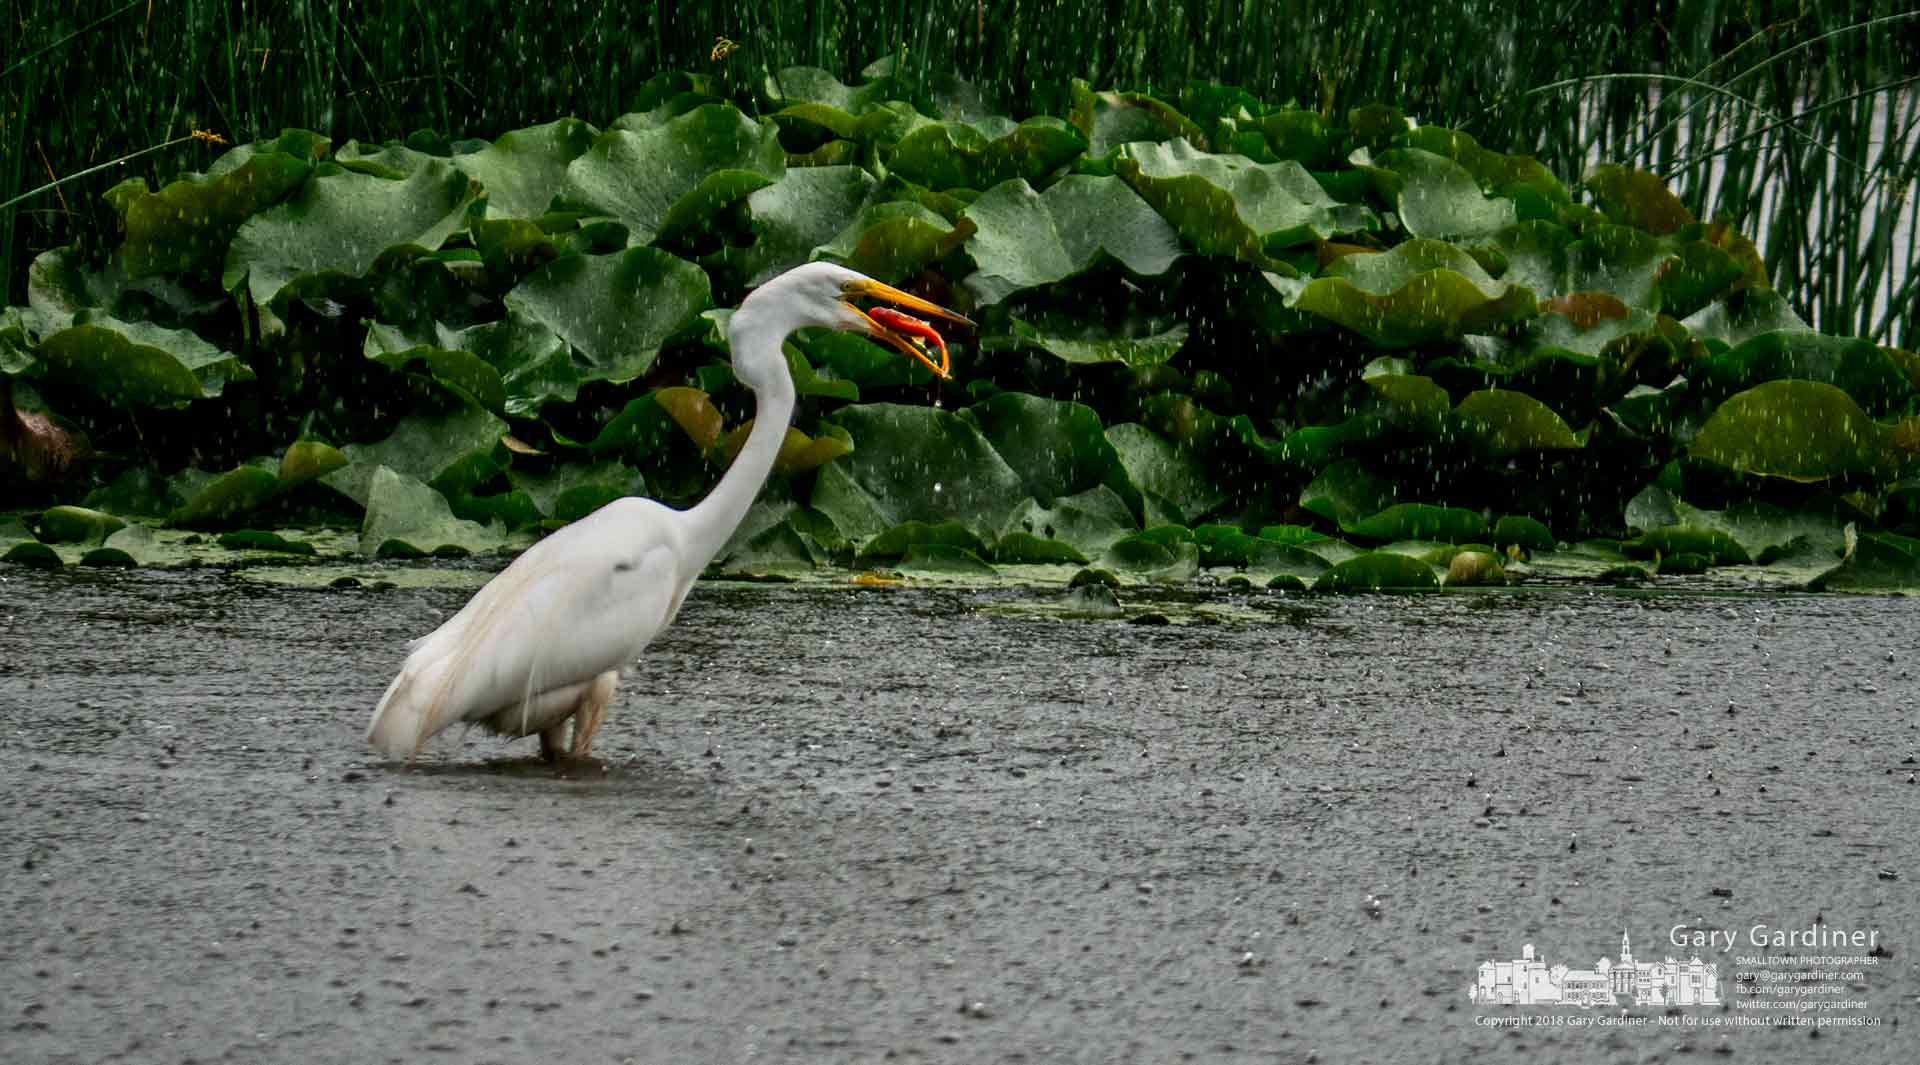 A white egret dines on a goldfish pulled from the waters of the Highlands wetlands during a late afternoon rain storm. My Final Photo for June 20, 2018.